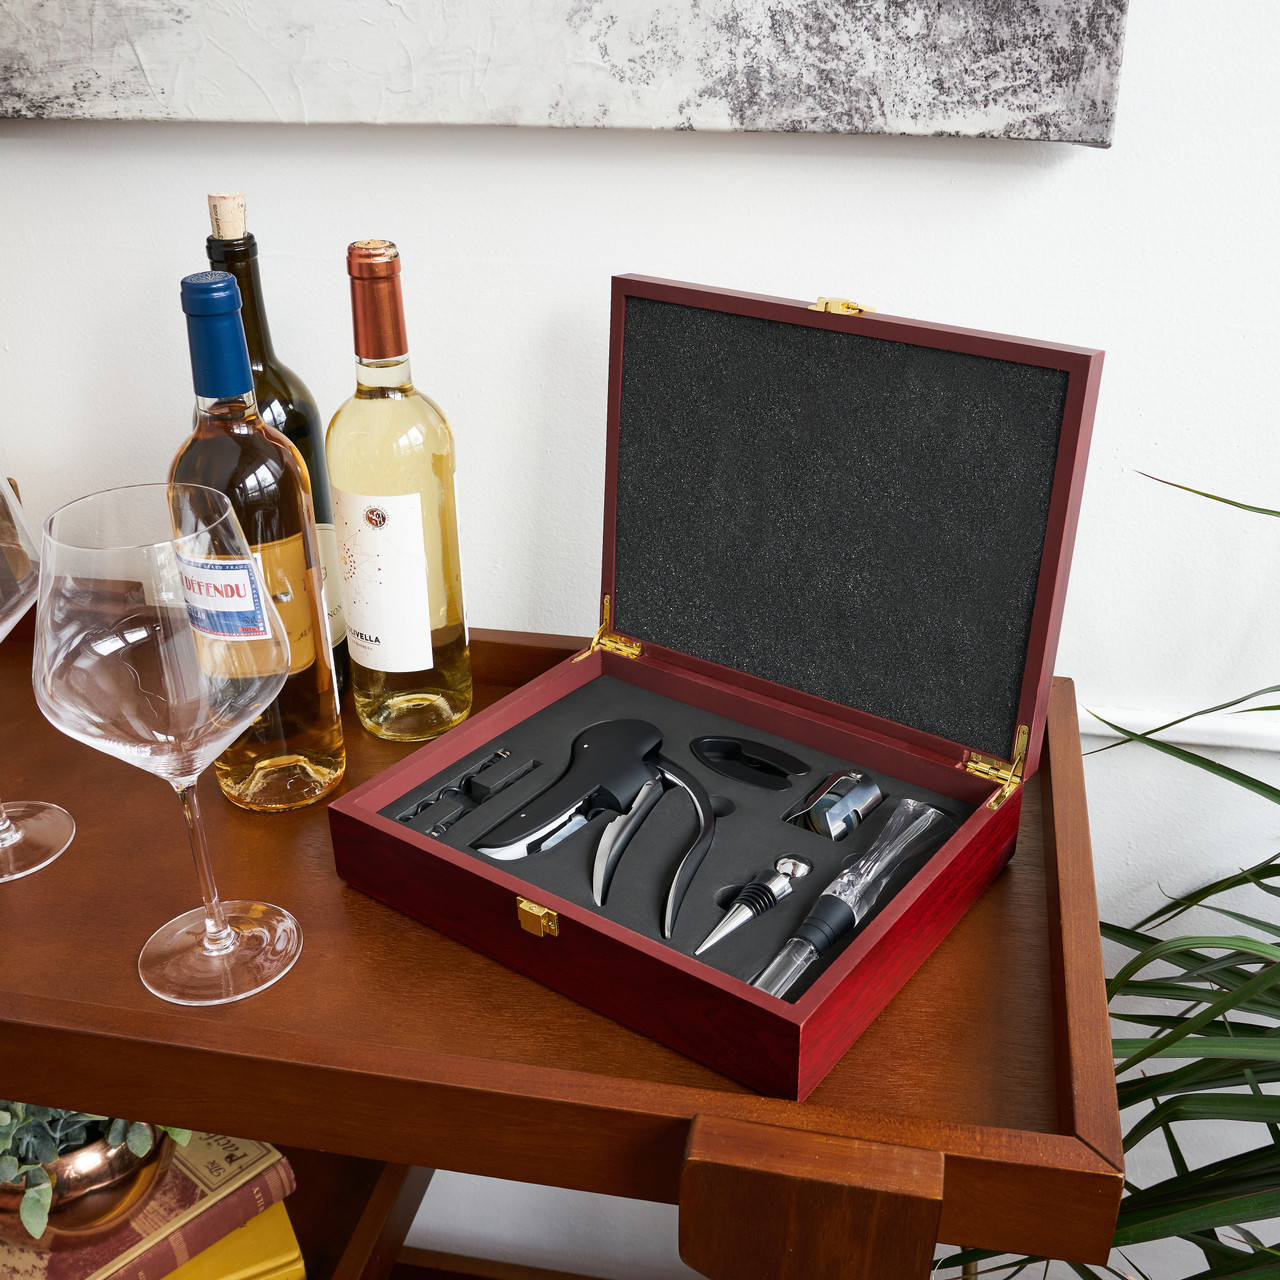 7 Piece Wine Tools Boxed Set by True